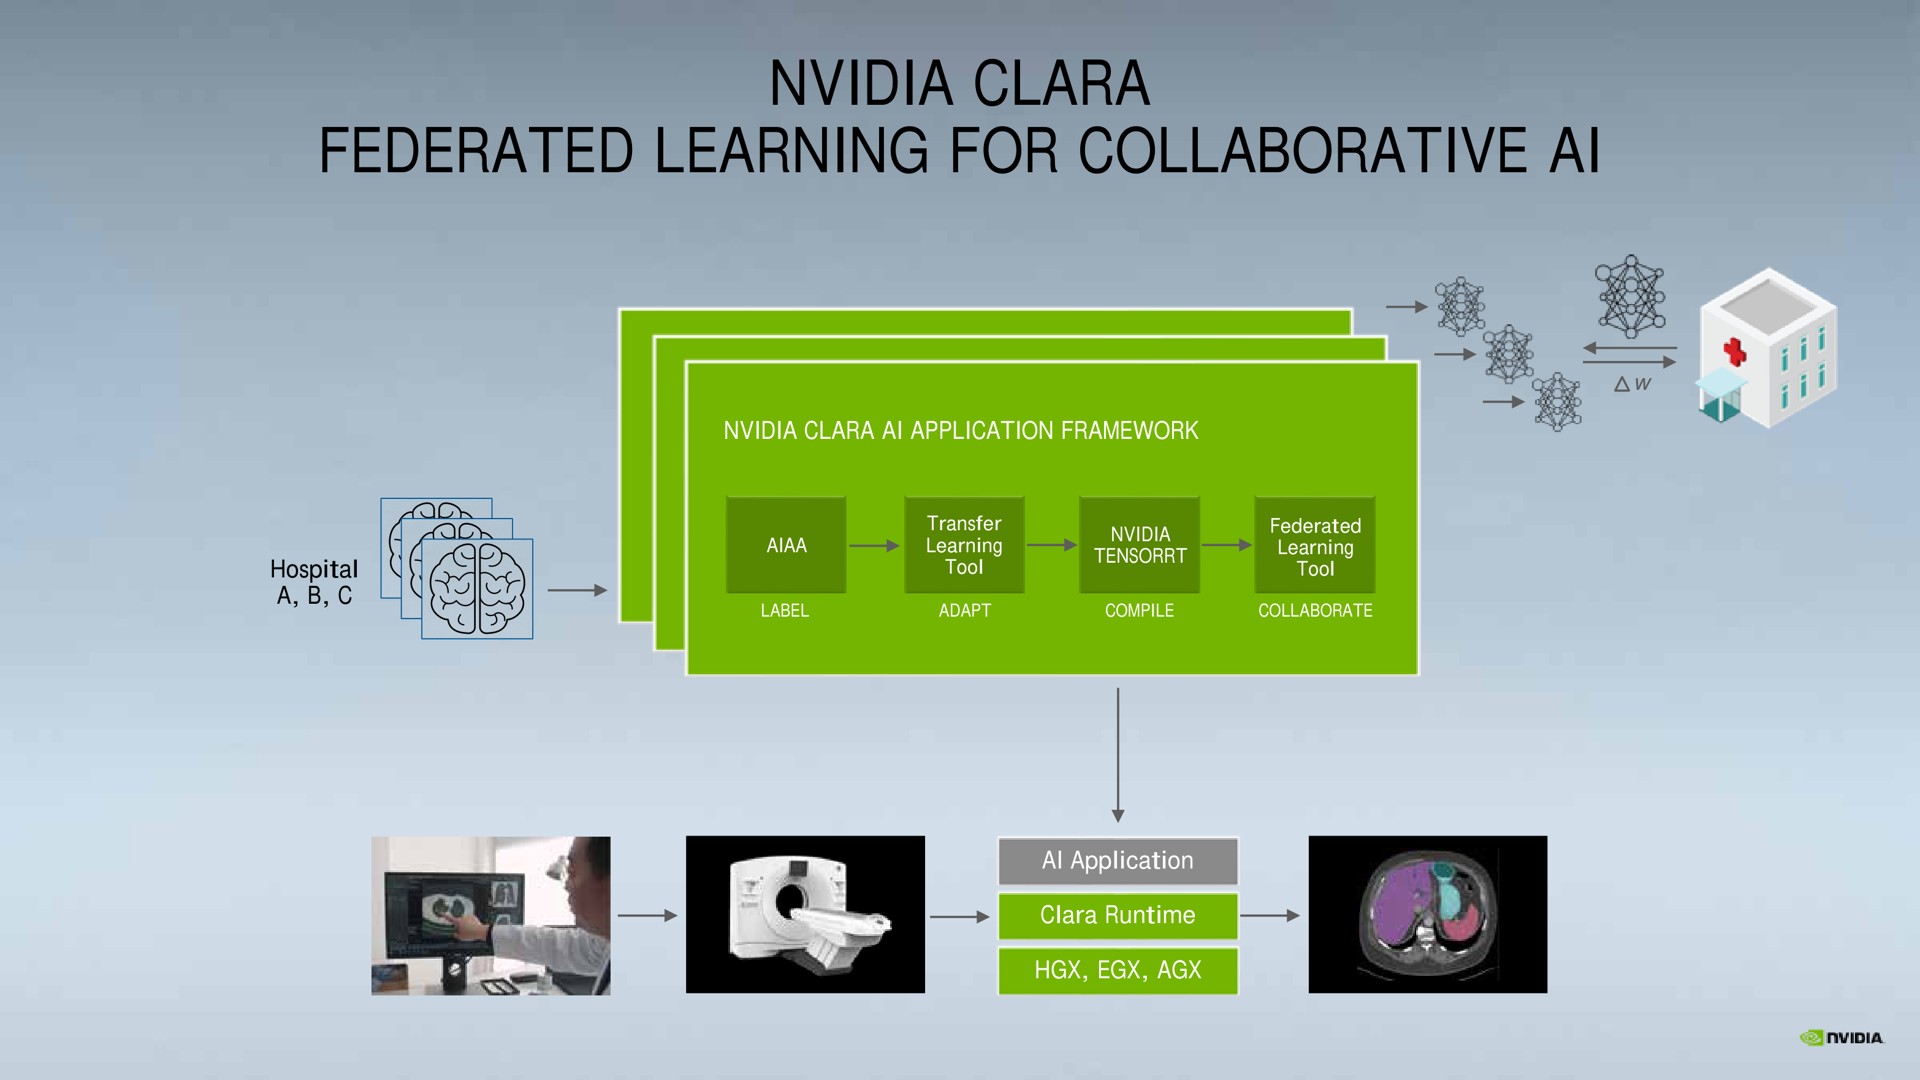 federated learning for collaborative | NVIDIA